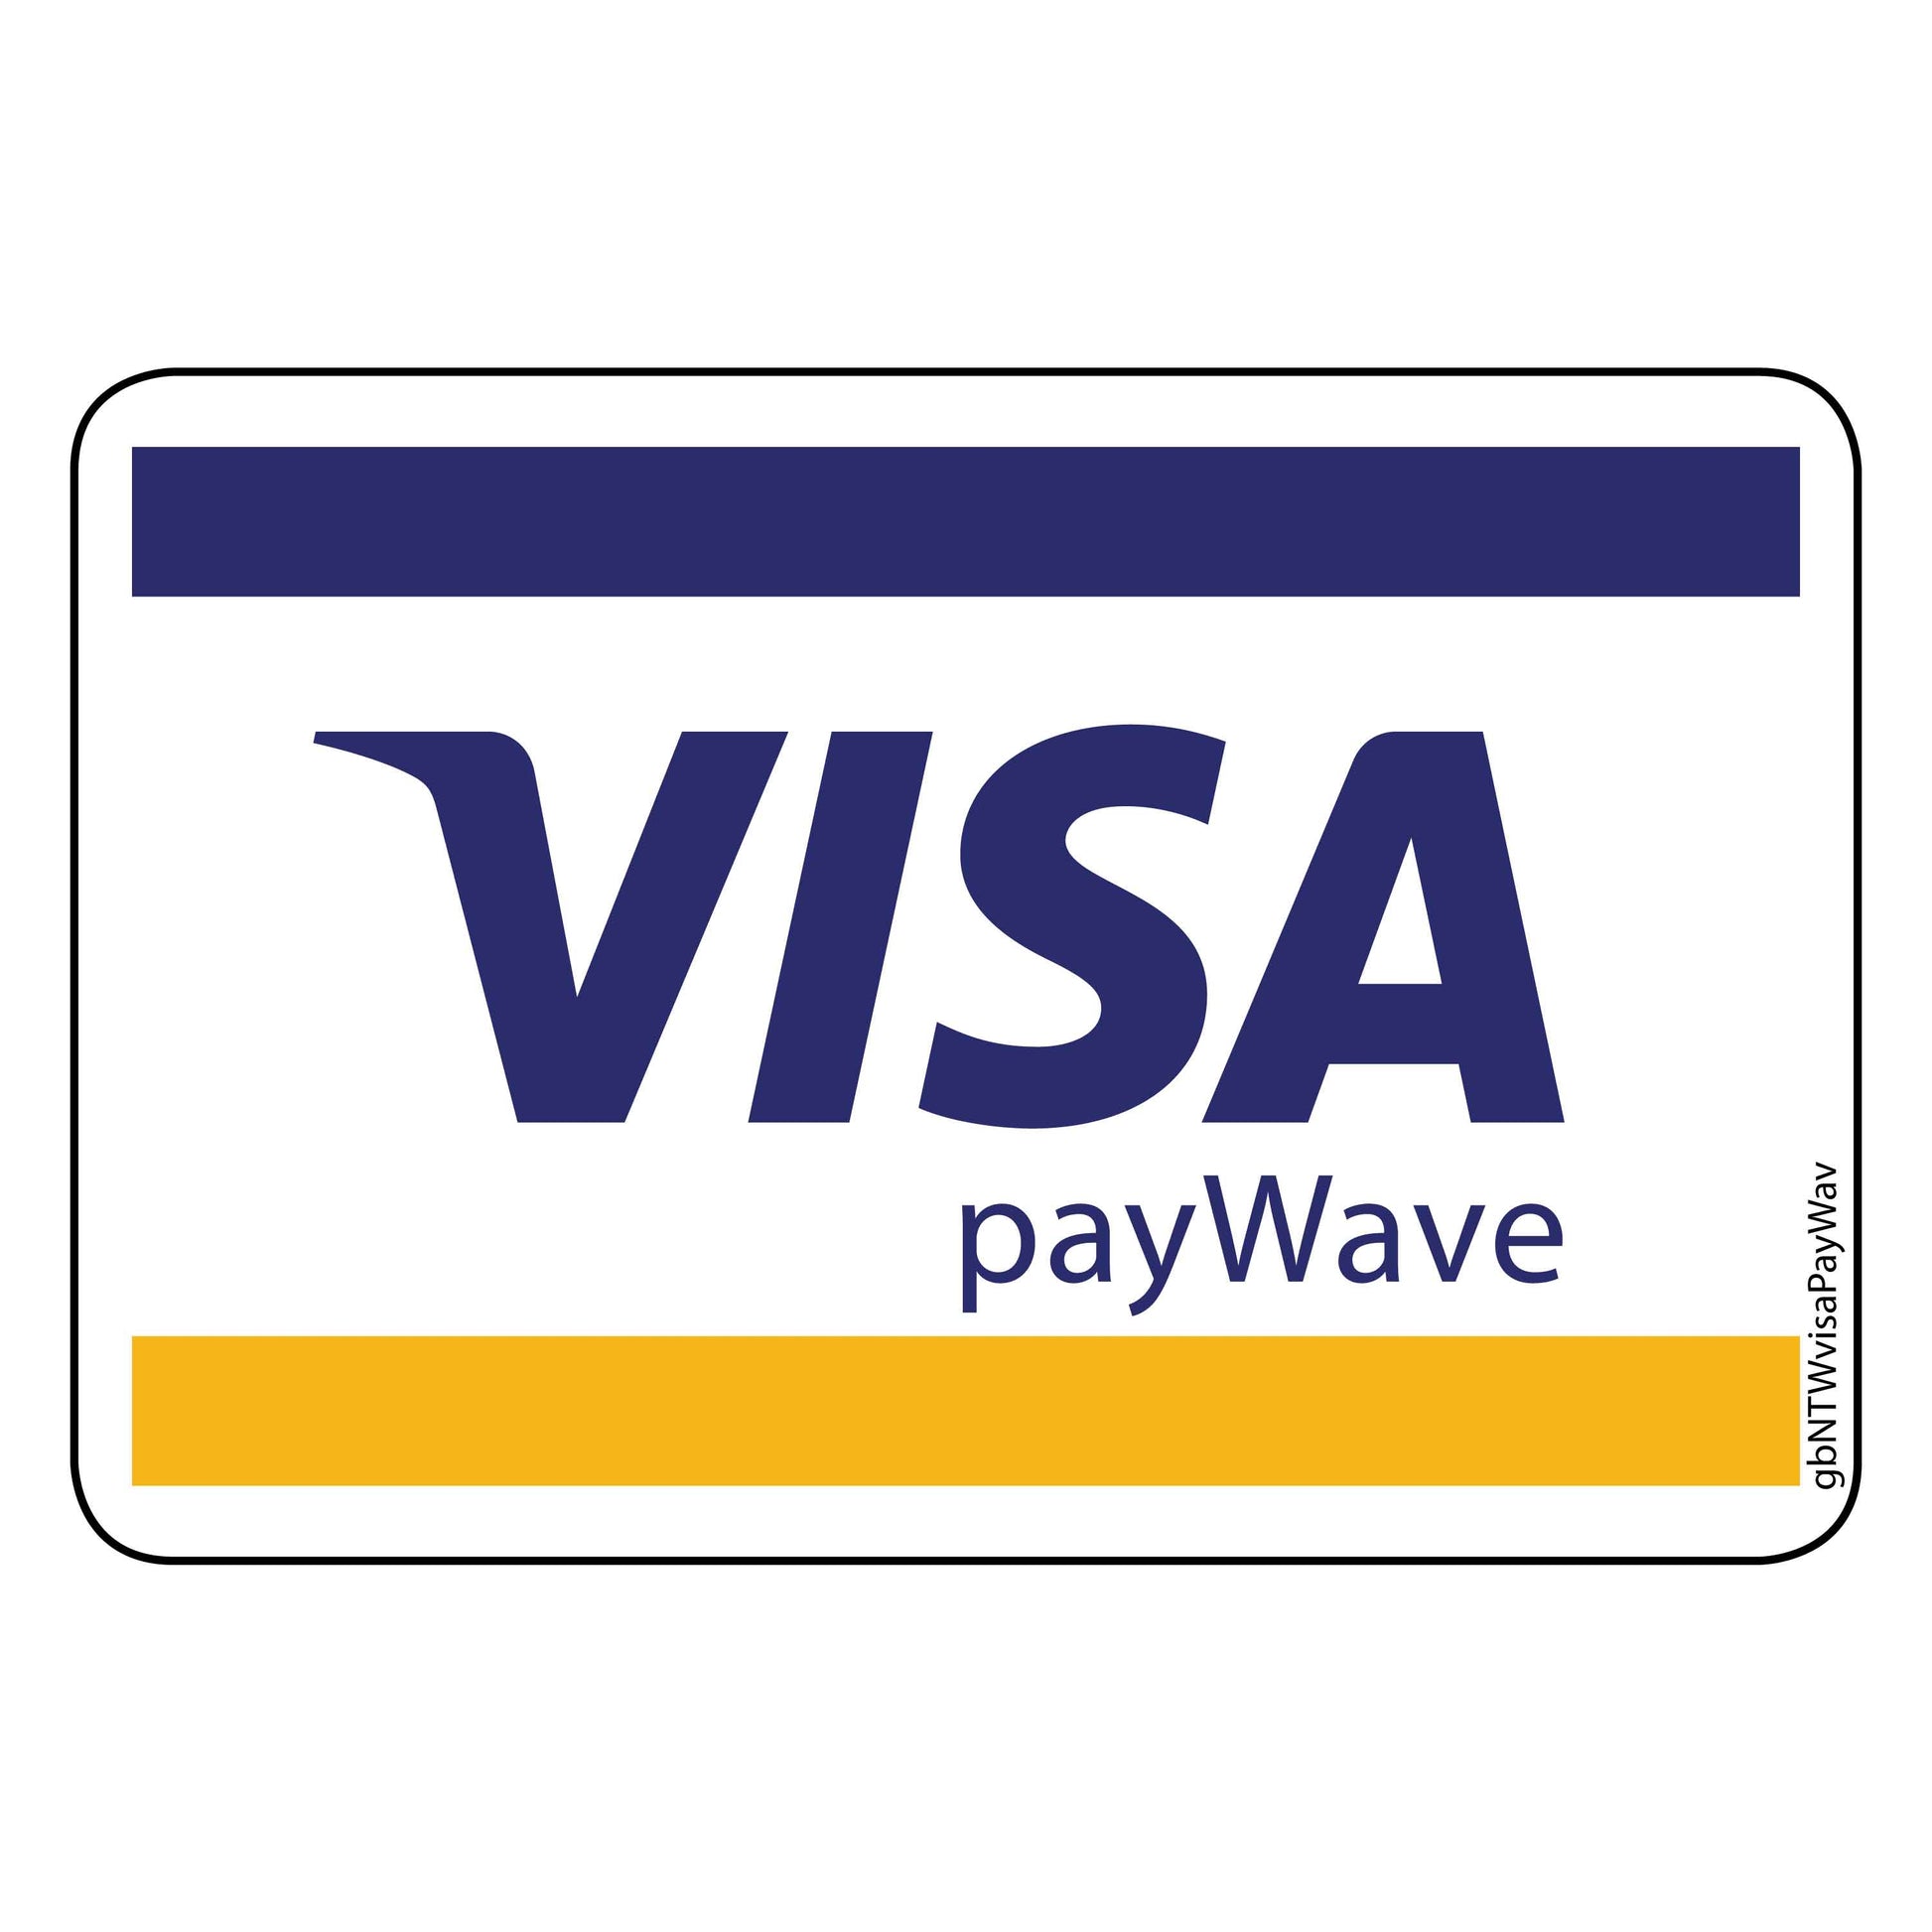 Single Network ATM Decal, Visa PayWave. 3 inches by 2 inches in size. 